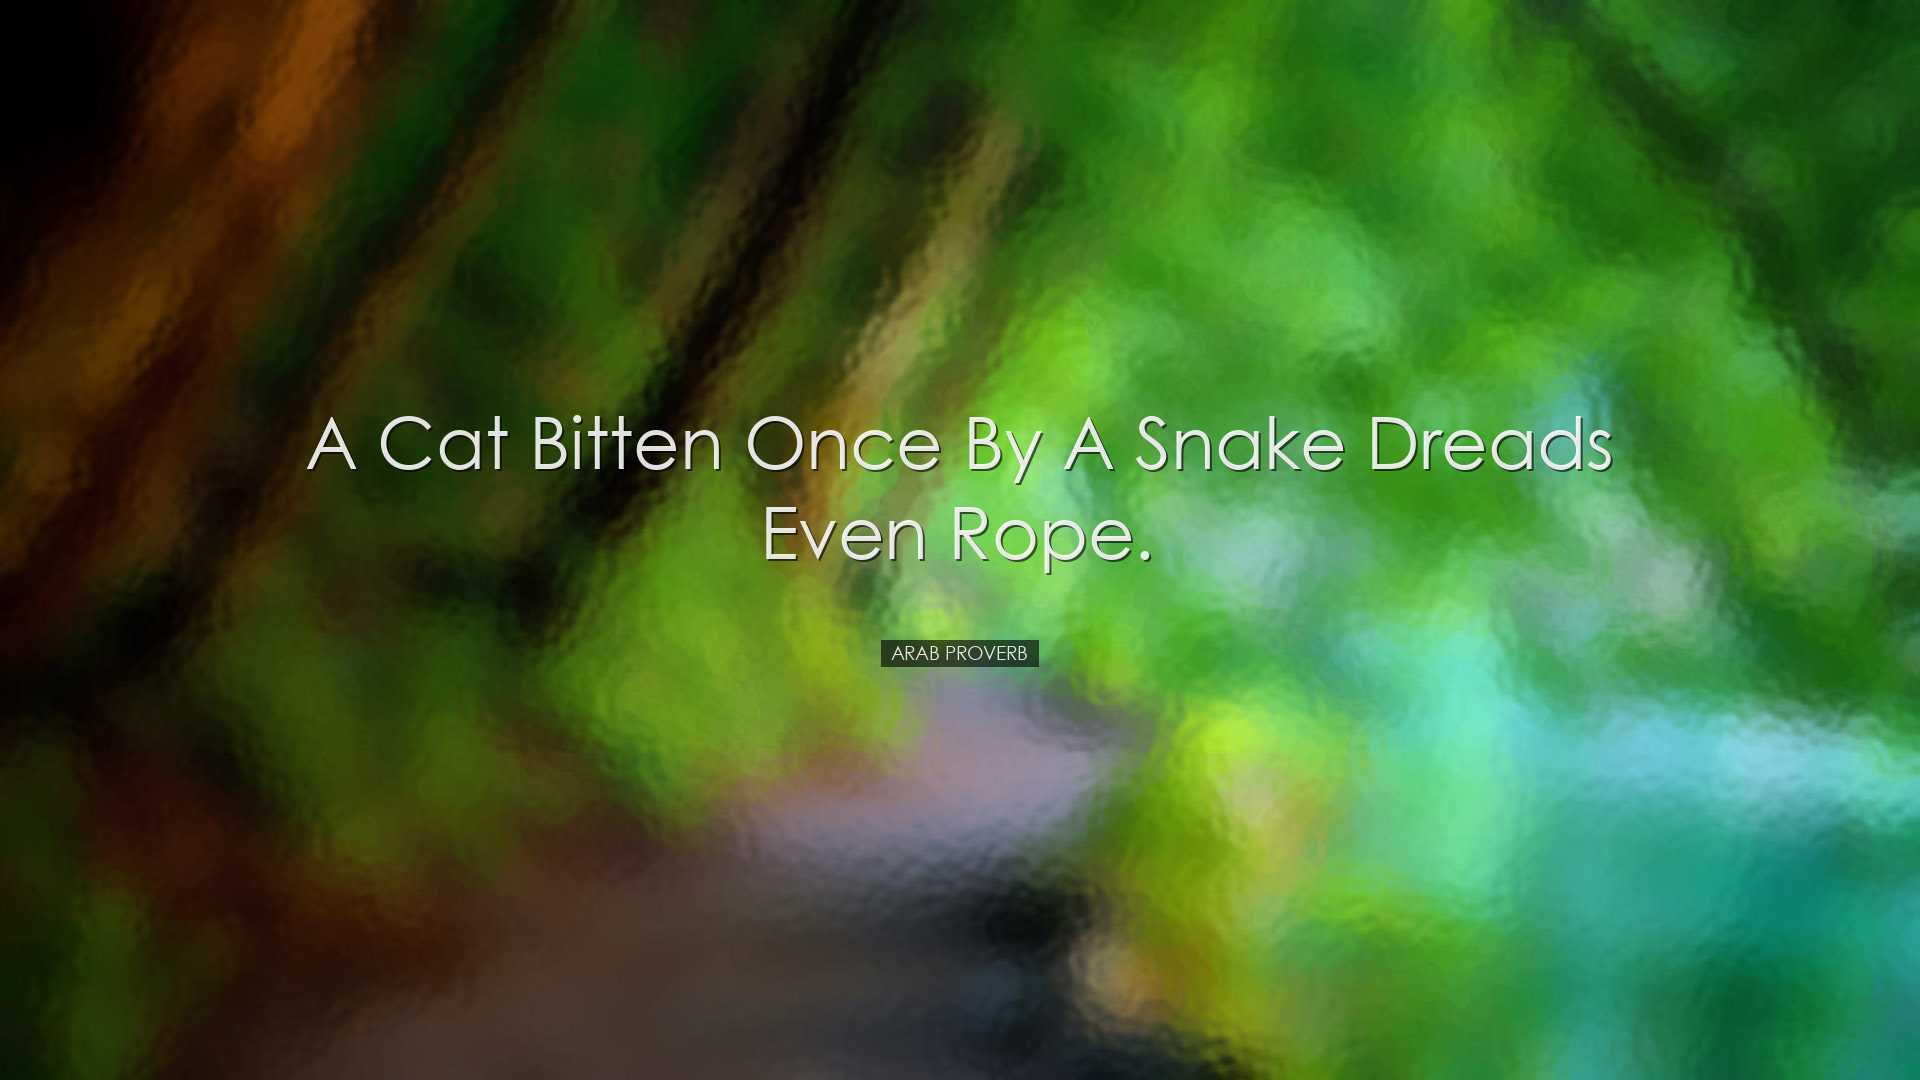 A cat bitten once by a snake dreads even rope. - Arab Proverb